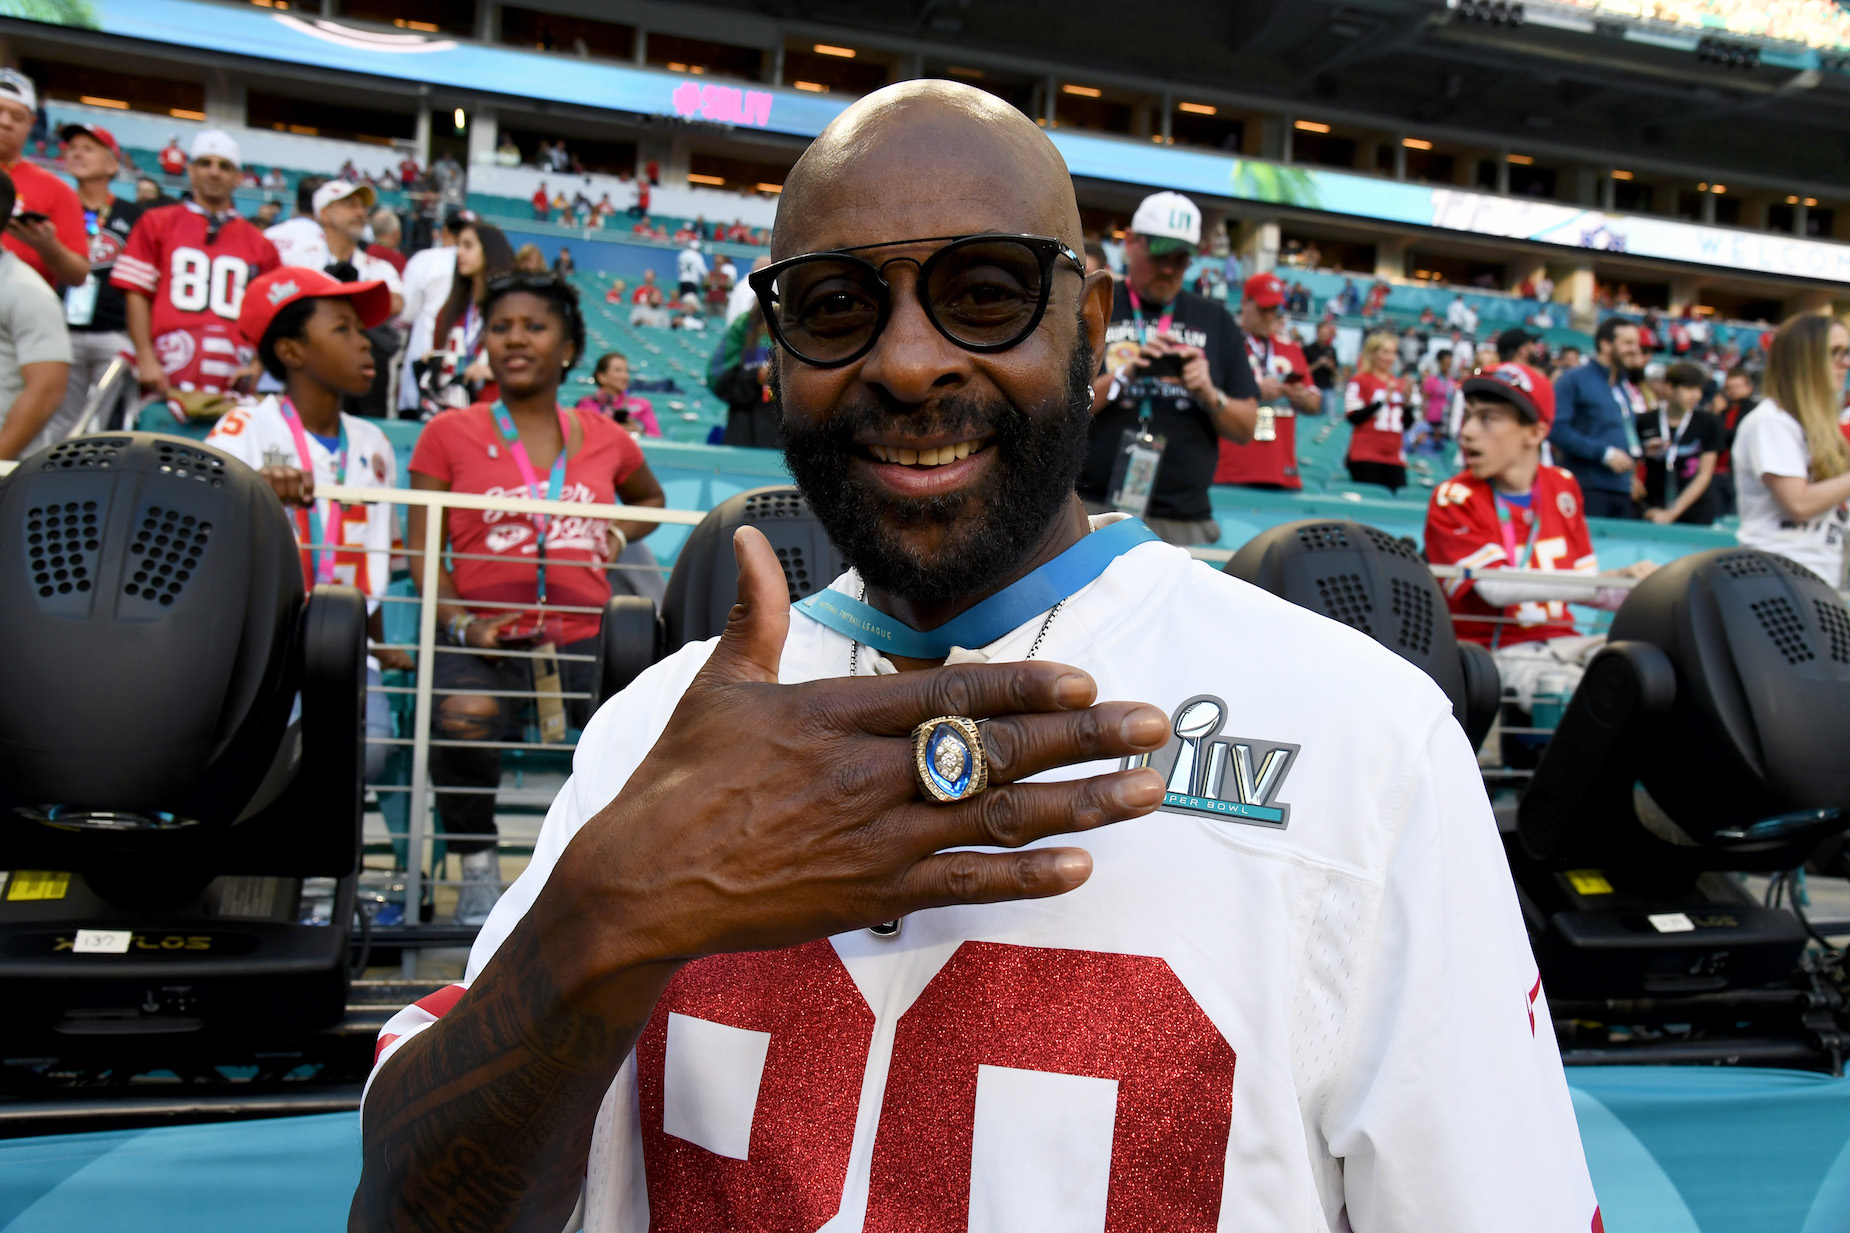 San Francisco 49ers legend Jerry Rice blasted his former team's attitude after their Week 1 loss.